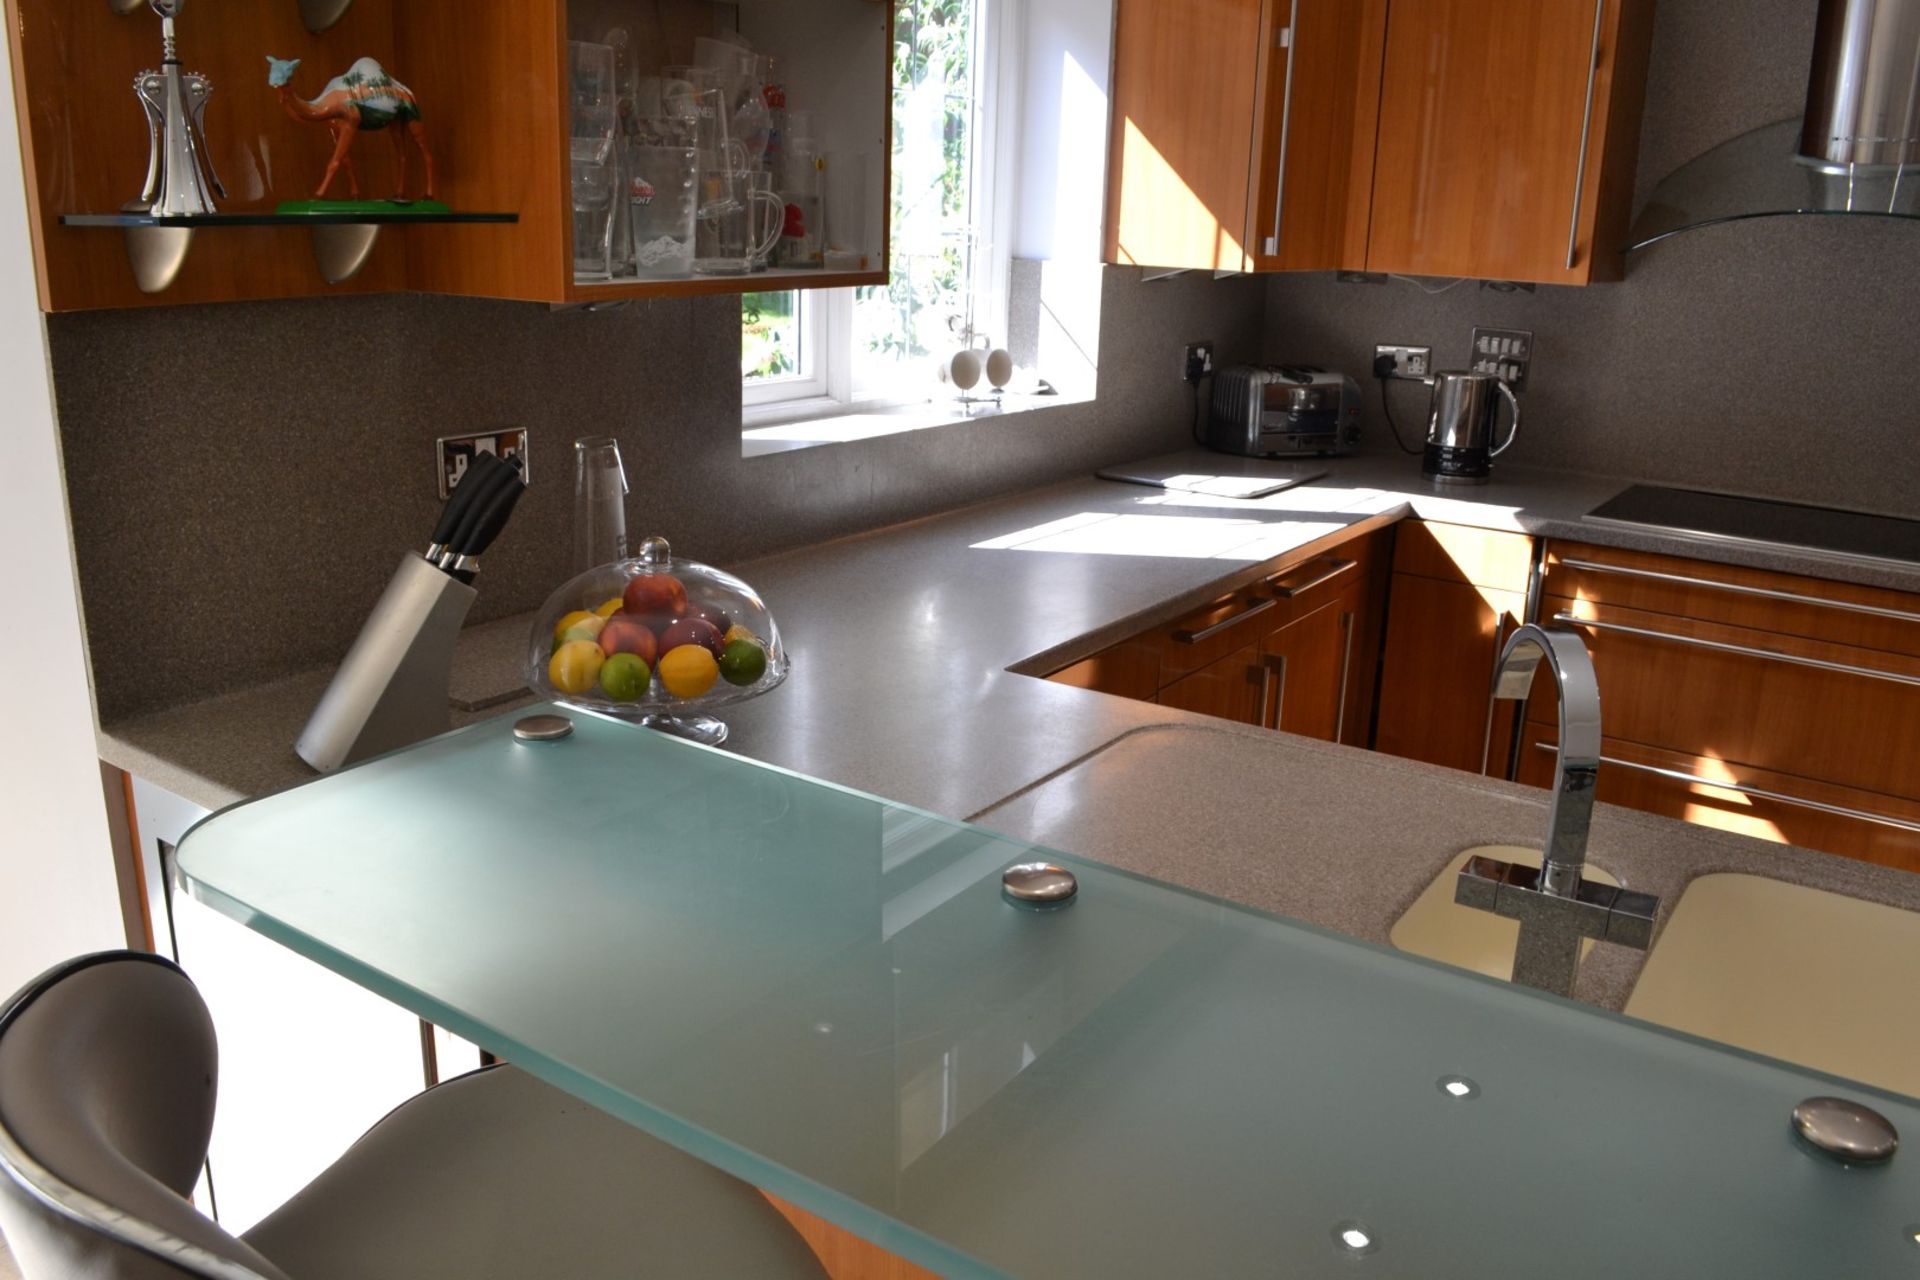 1 x Bespoke Siematic Gloss Fitted Kitchen With Corian Worktops and Frosted Glass Breakfast Bar - - Image 4 of 75